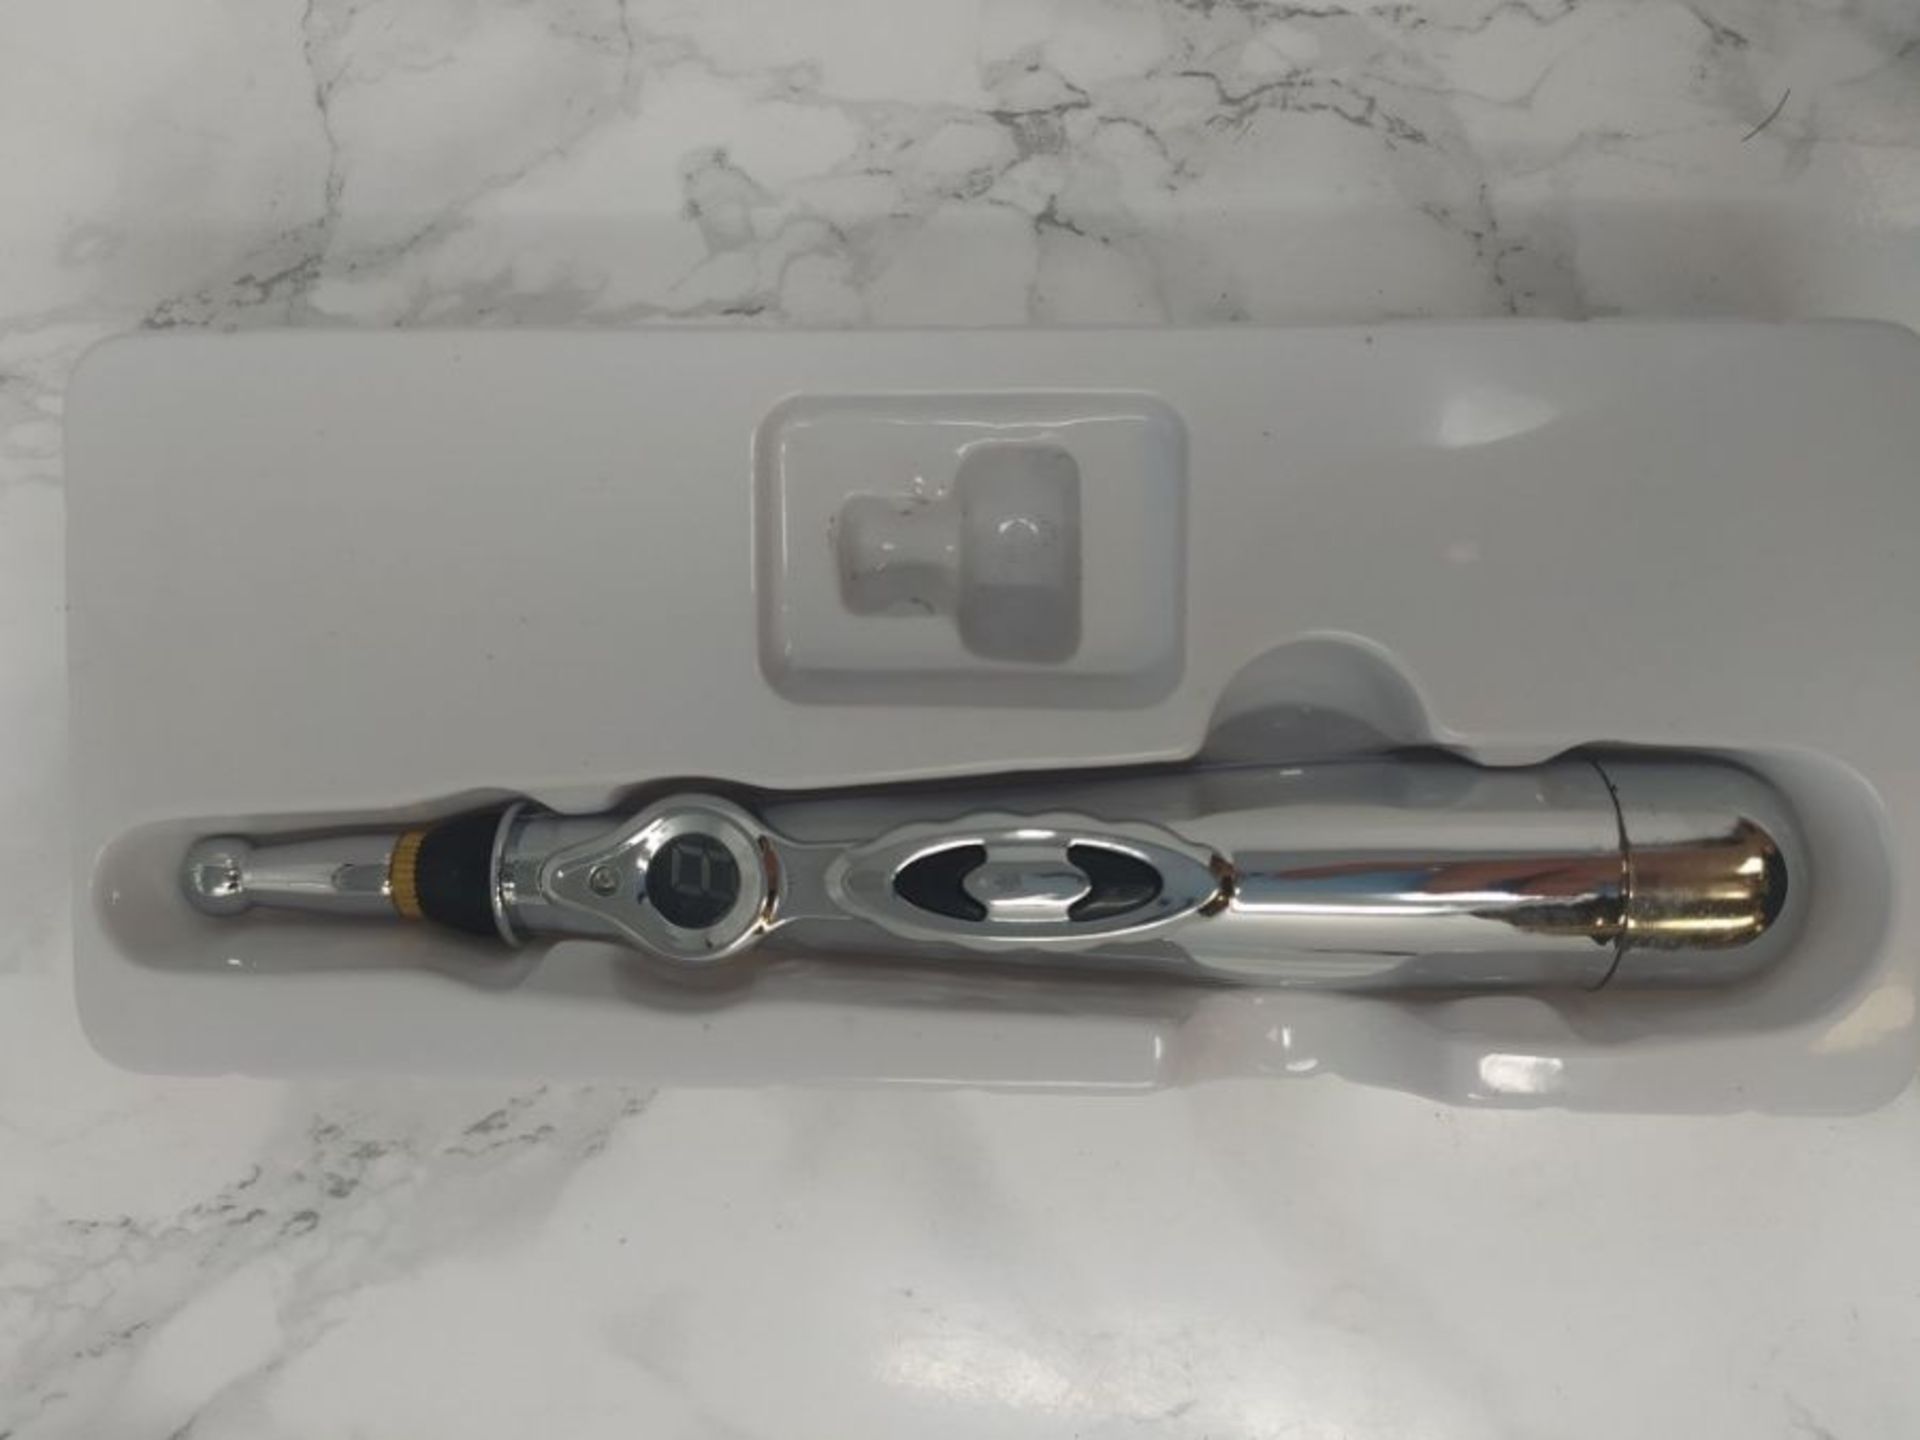 Acupuncture Pen, SUPERFA 3 in 1 Acupuncture Meridian Massage Pen Relief Pain Therapy T - Image 3 of 3